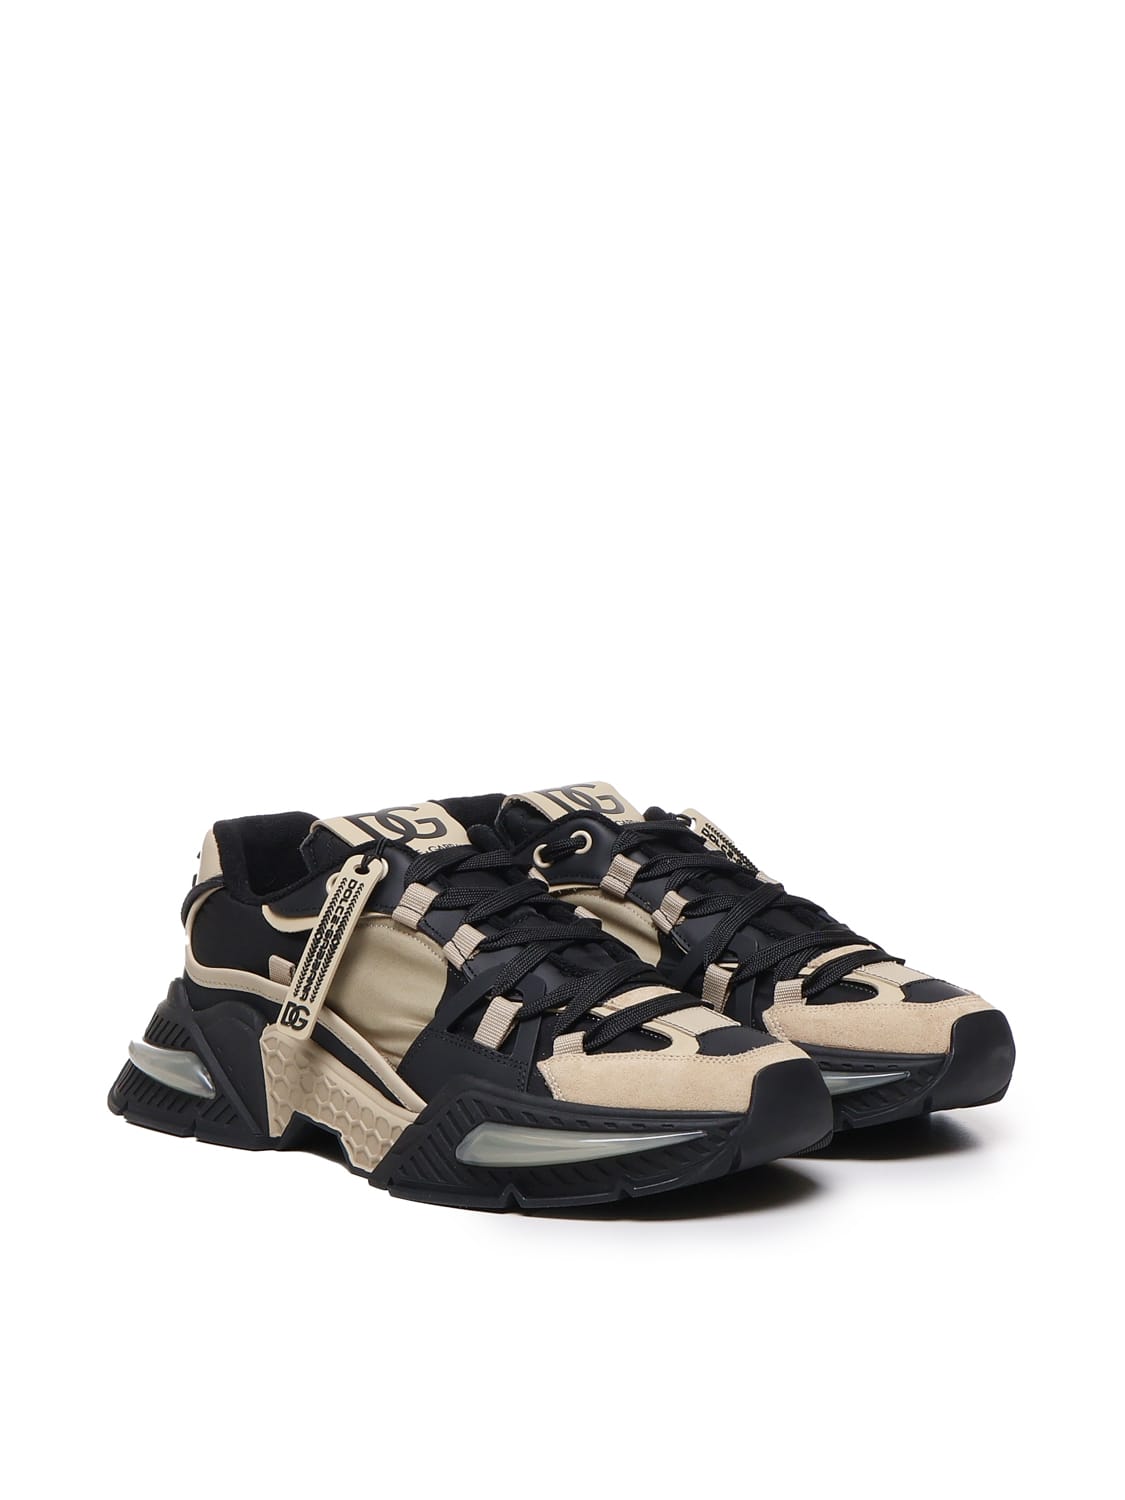 Shop Dolce & Gabbana Airmaster Sneaker In Nylon And Suede In Beige, Black